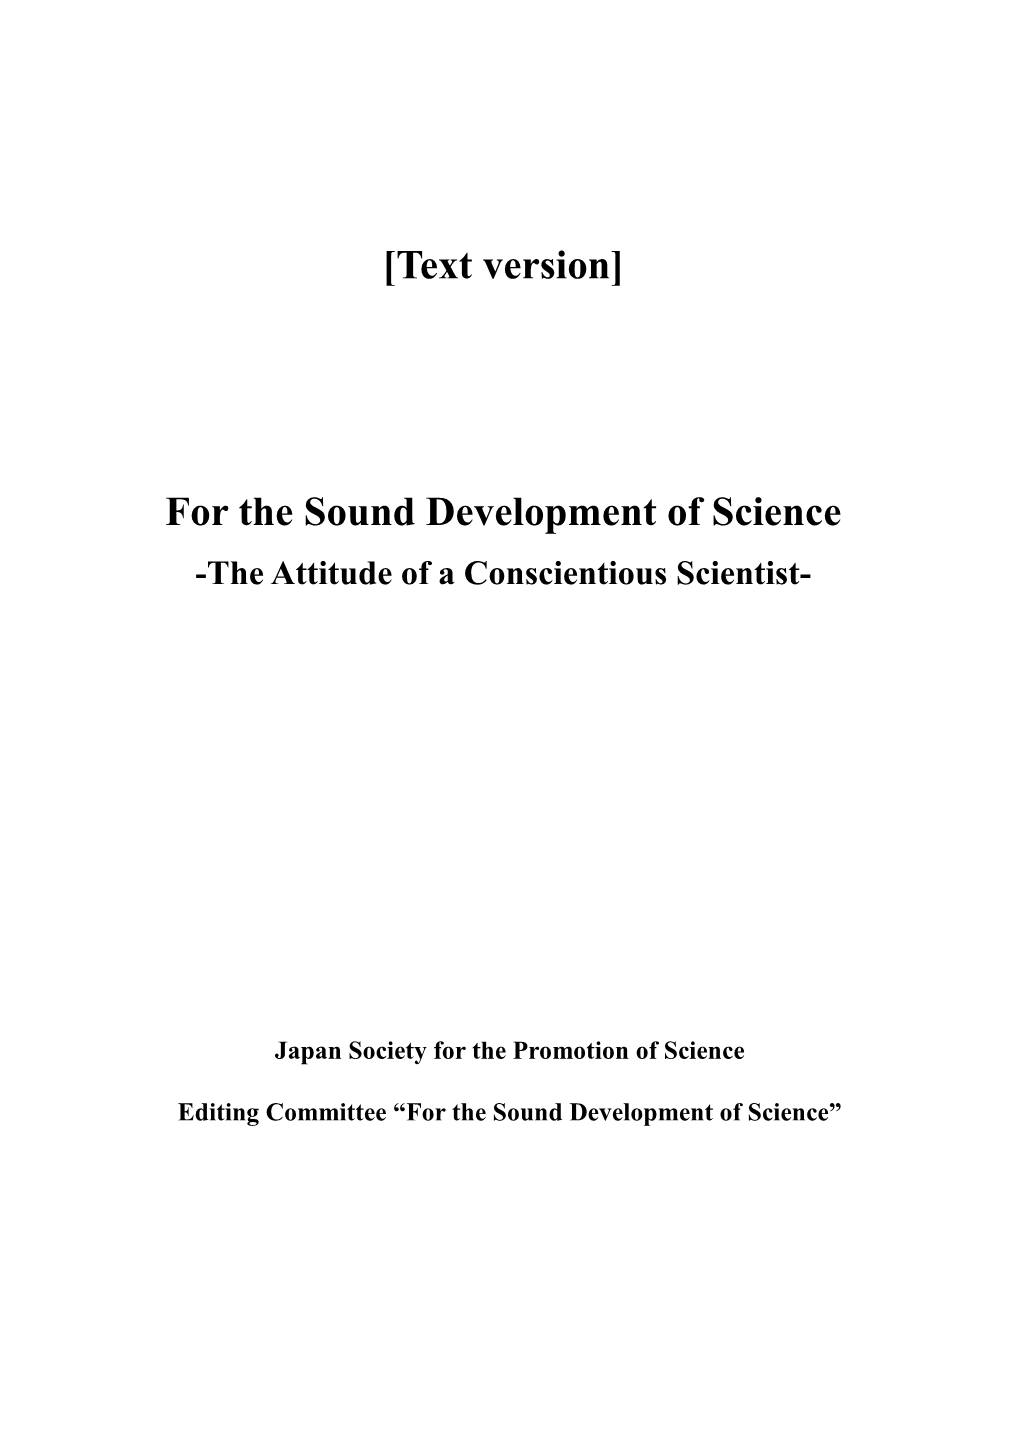 [Text Version] for the Sound Development of Science